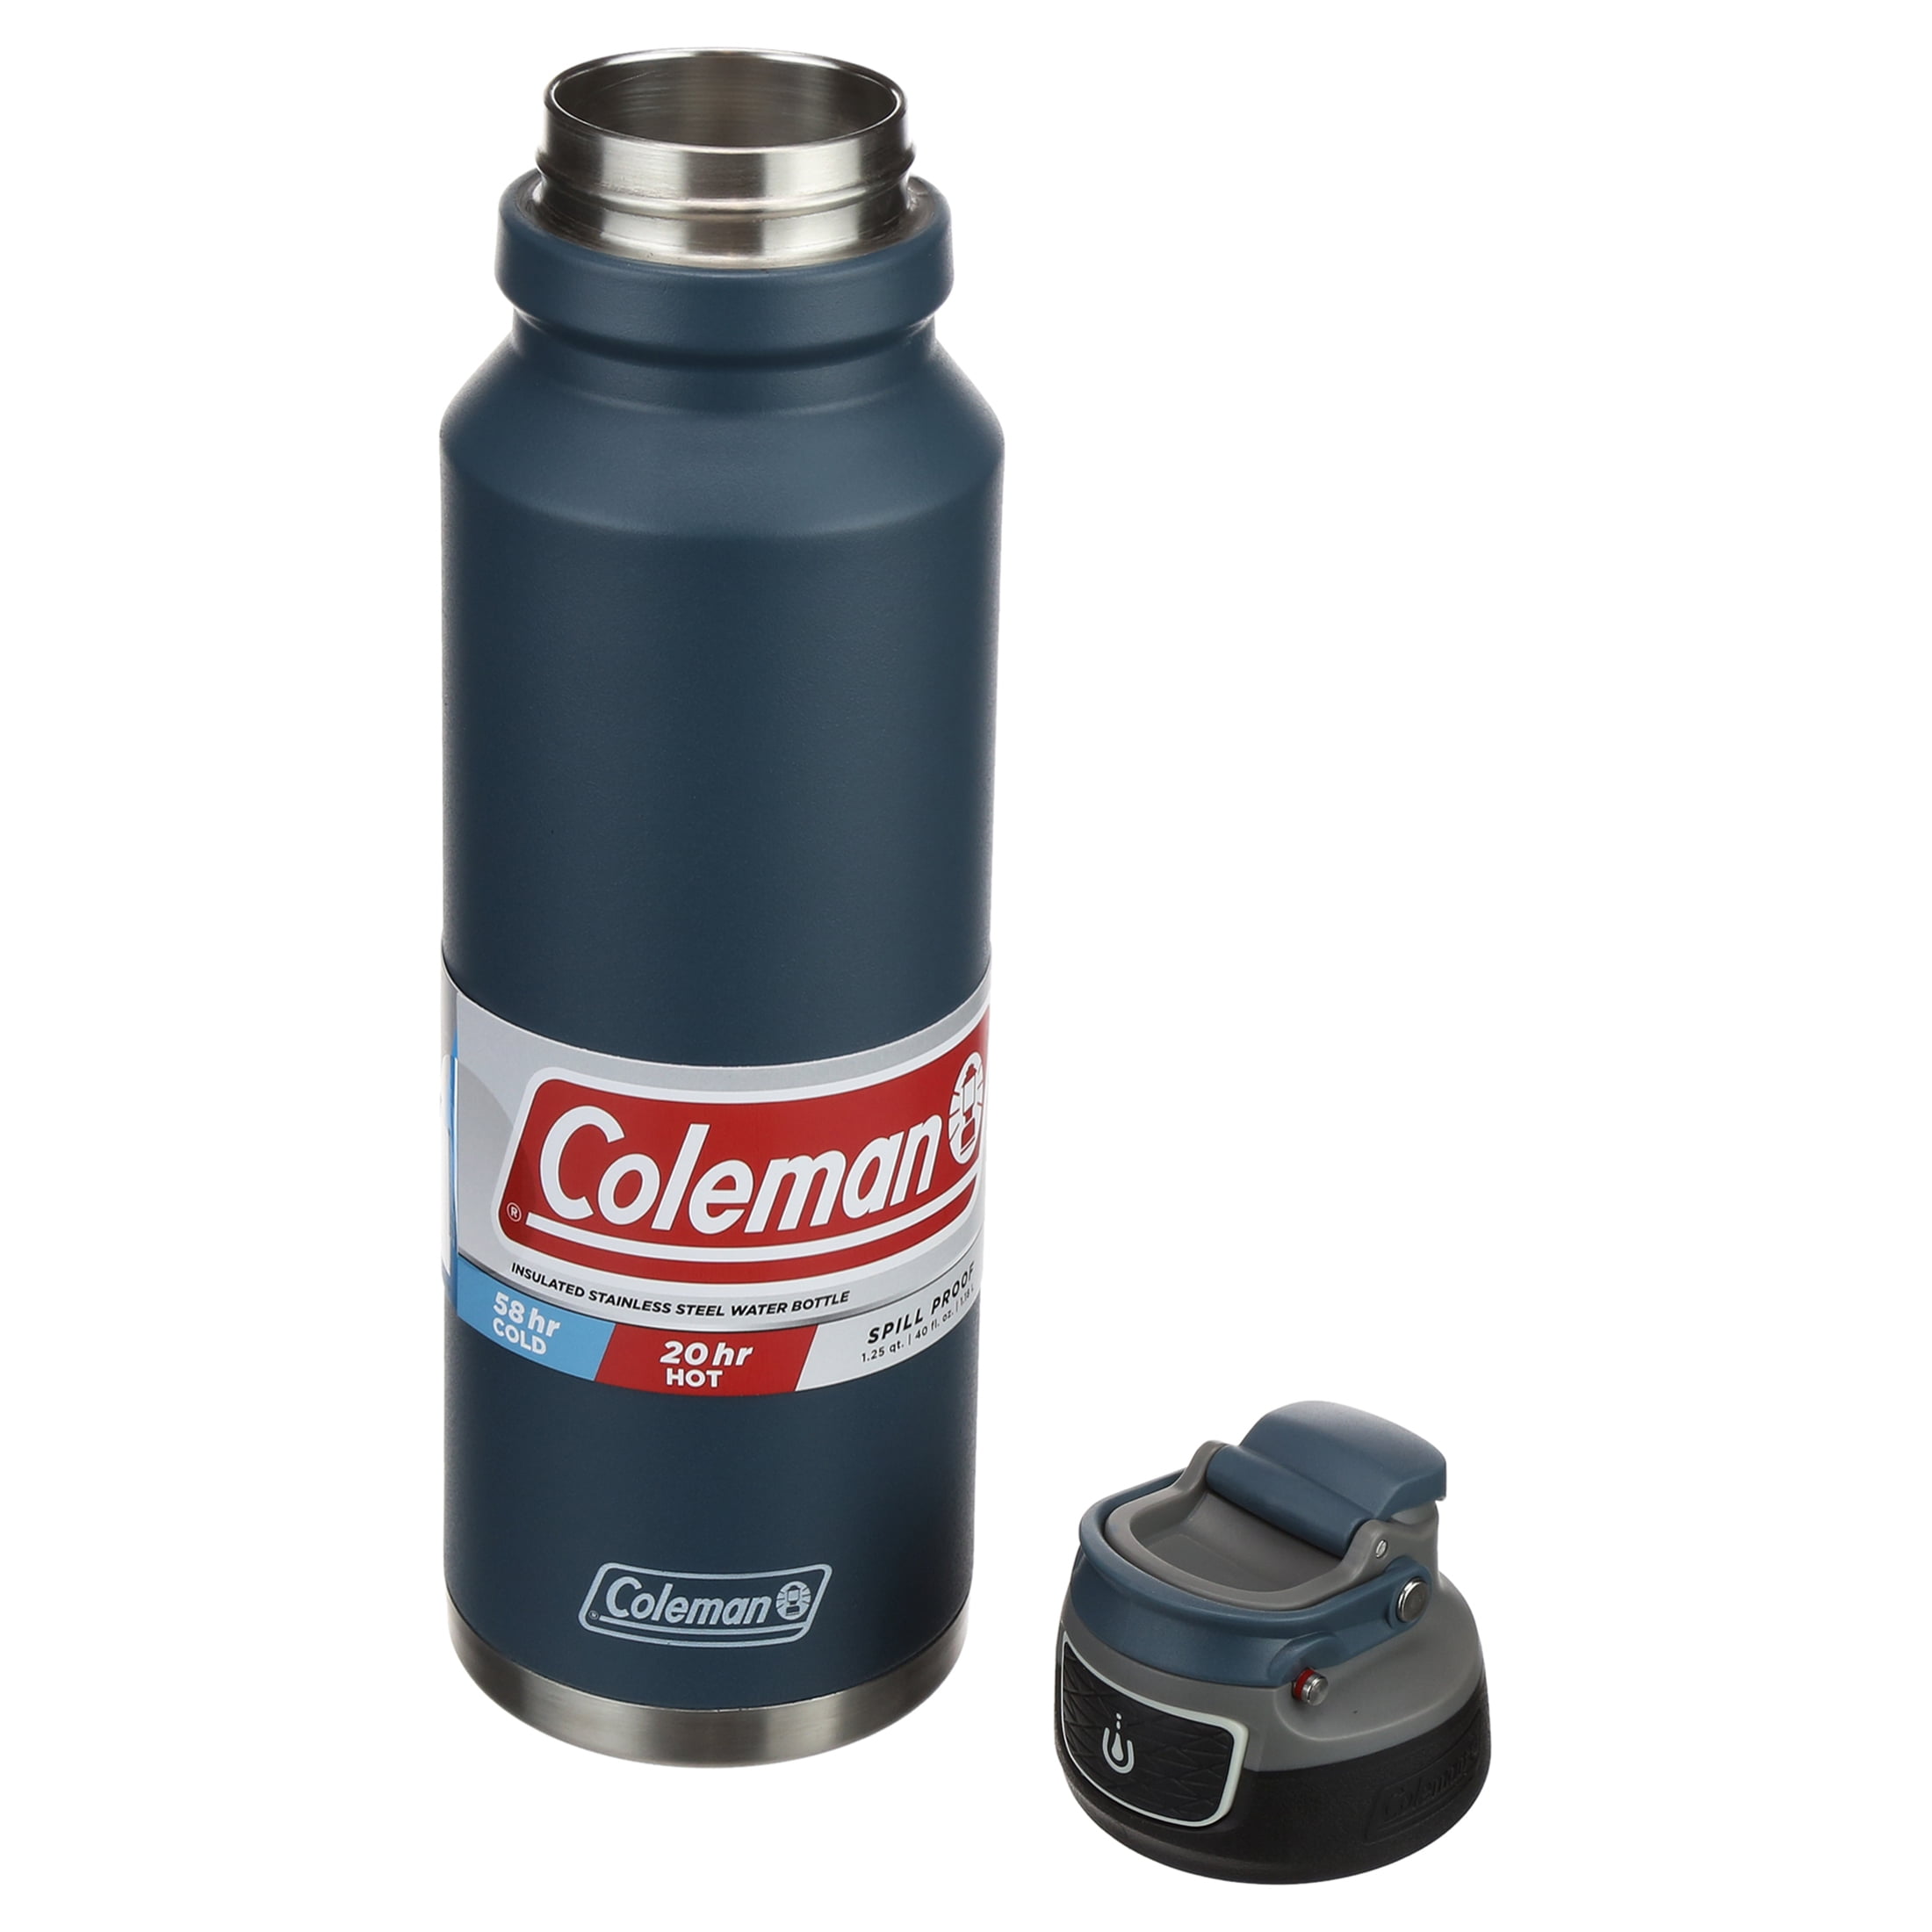 Coleman 24 oz. Spider Mum Yellow Autoseal FreeFlow Stainless Steel  Insulated Water Bottle 2148918 - The Home Depot